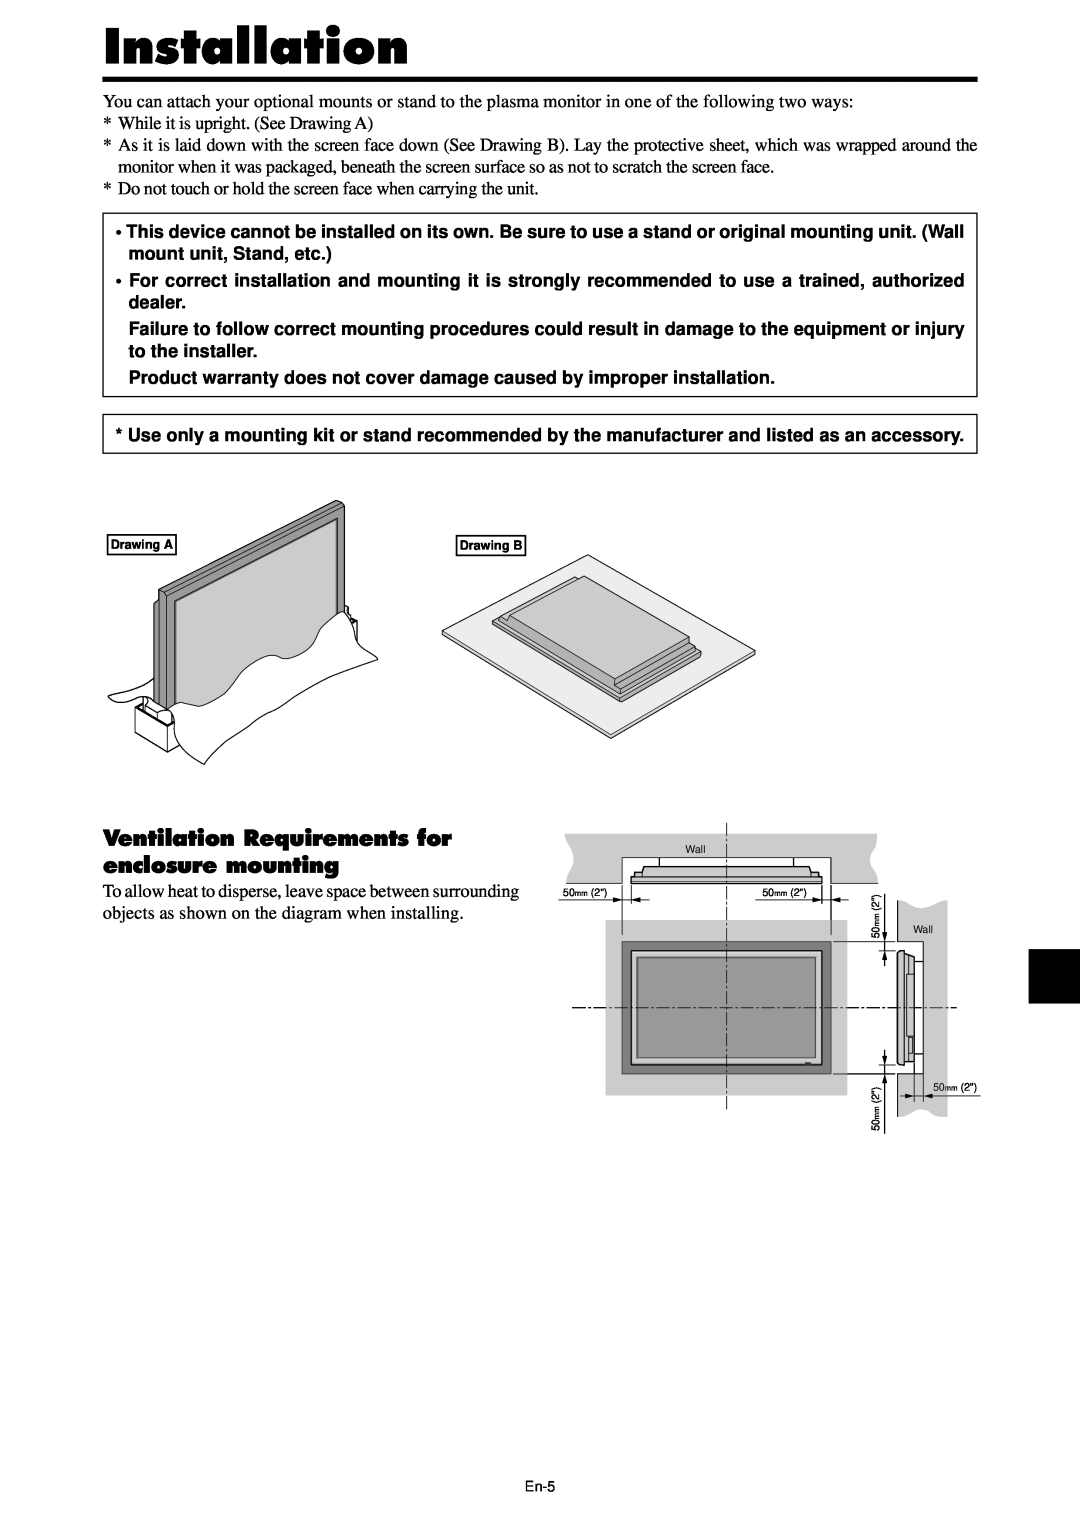 NEC PX-42XM4A, PX-61XM4A manual Installation, Ventilation Requirements for enclosure mounting 